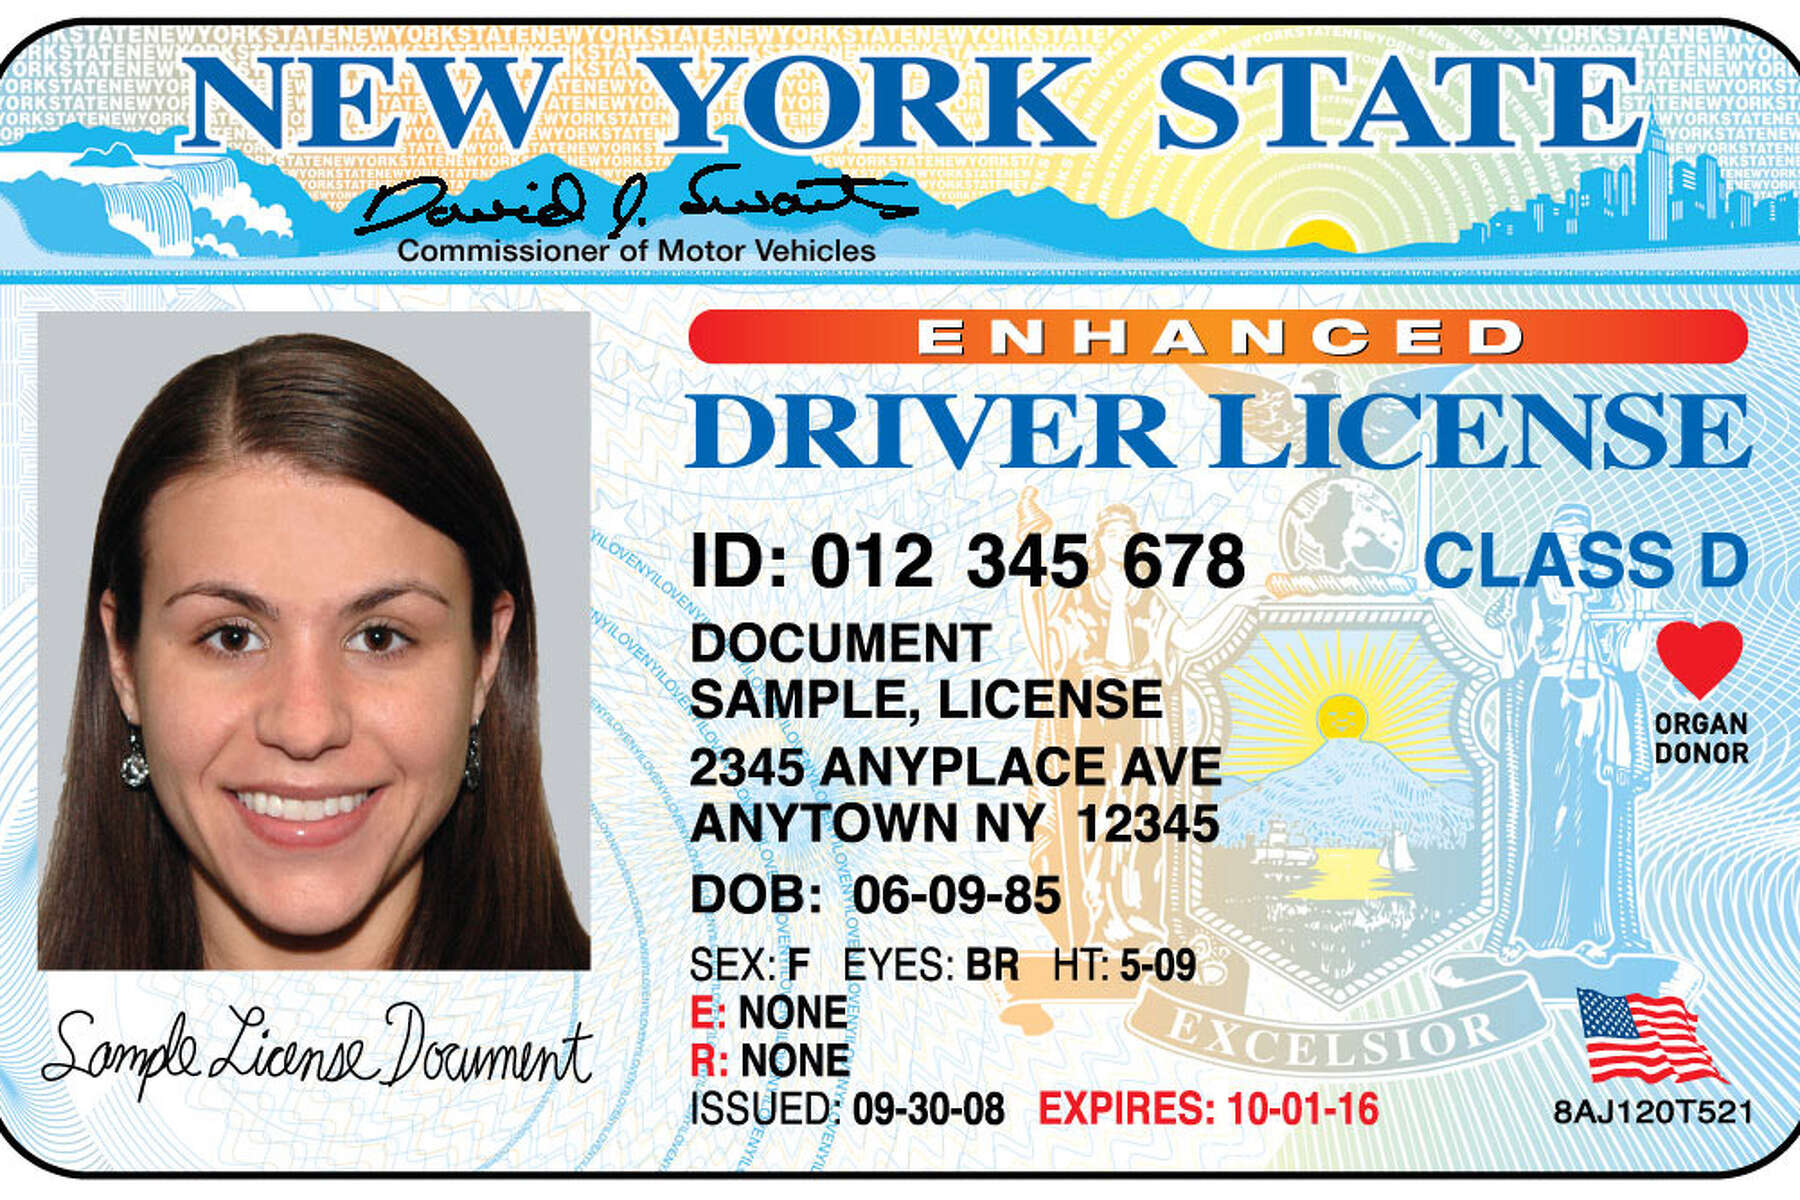 do you have to pay to renew license ny